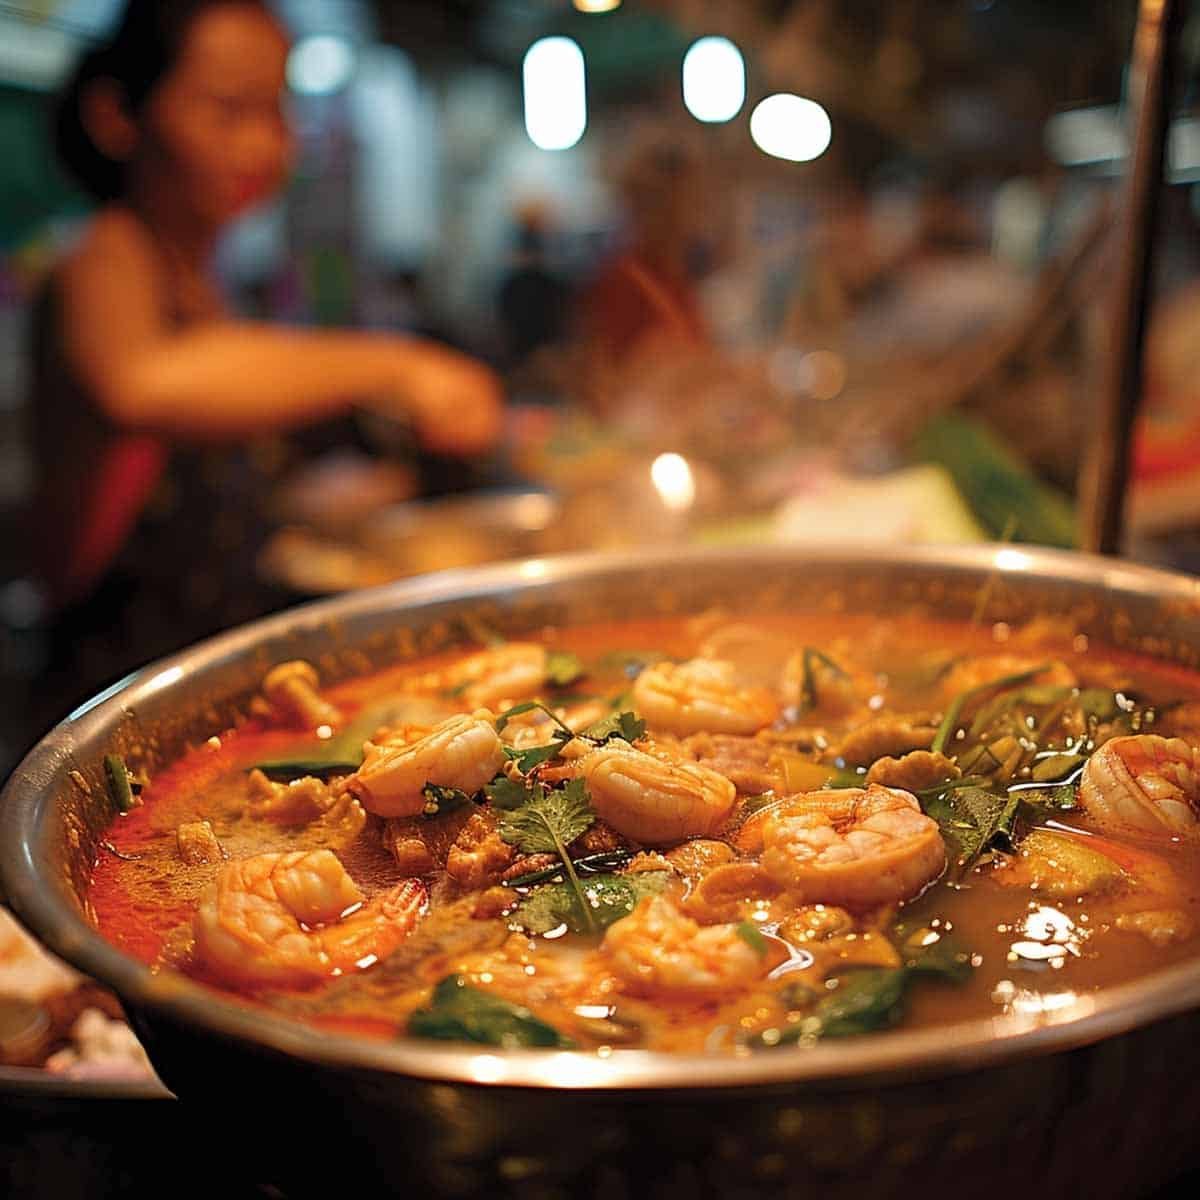 Bowl of Tom Yum Goong Thai hot and sour shrimp soup being served at a bustling night market, filled with shrimp, mushrooms, and herbs